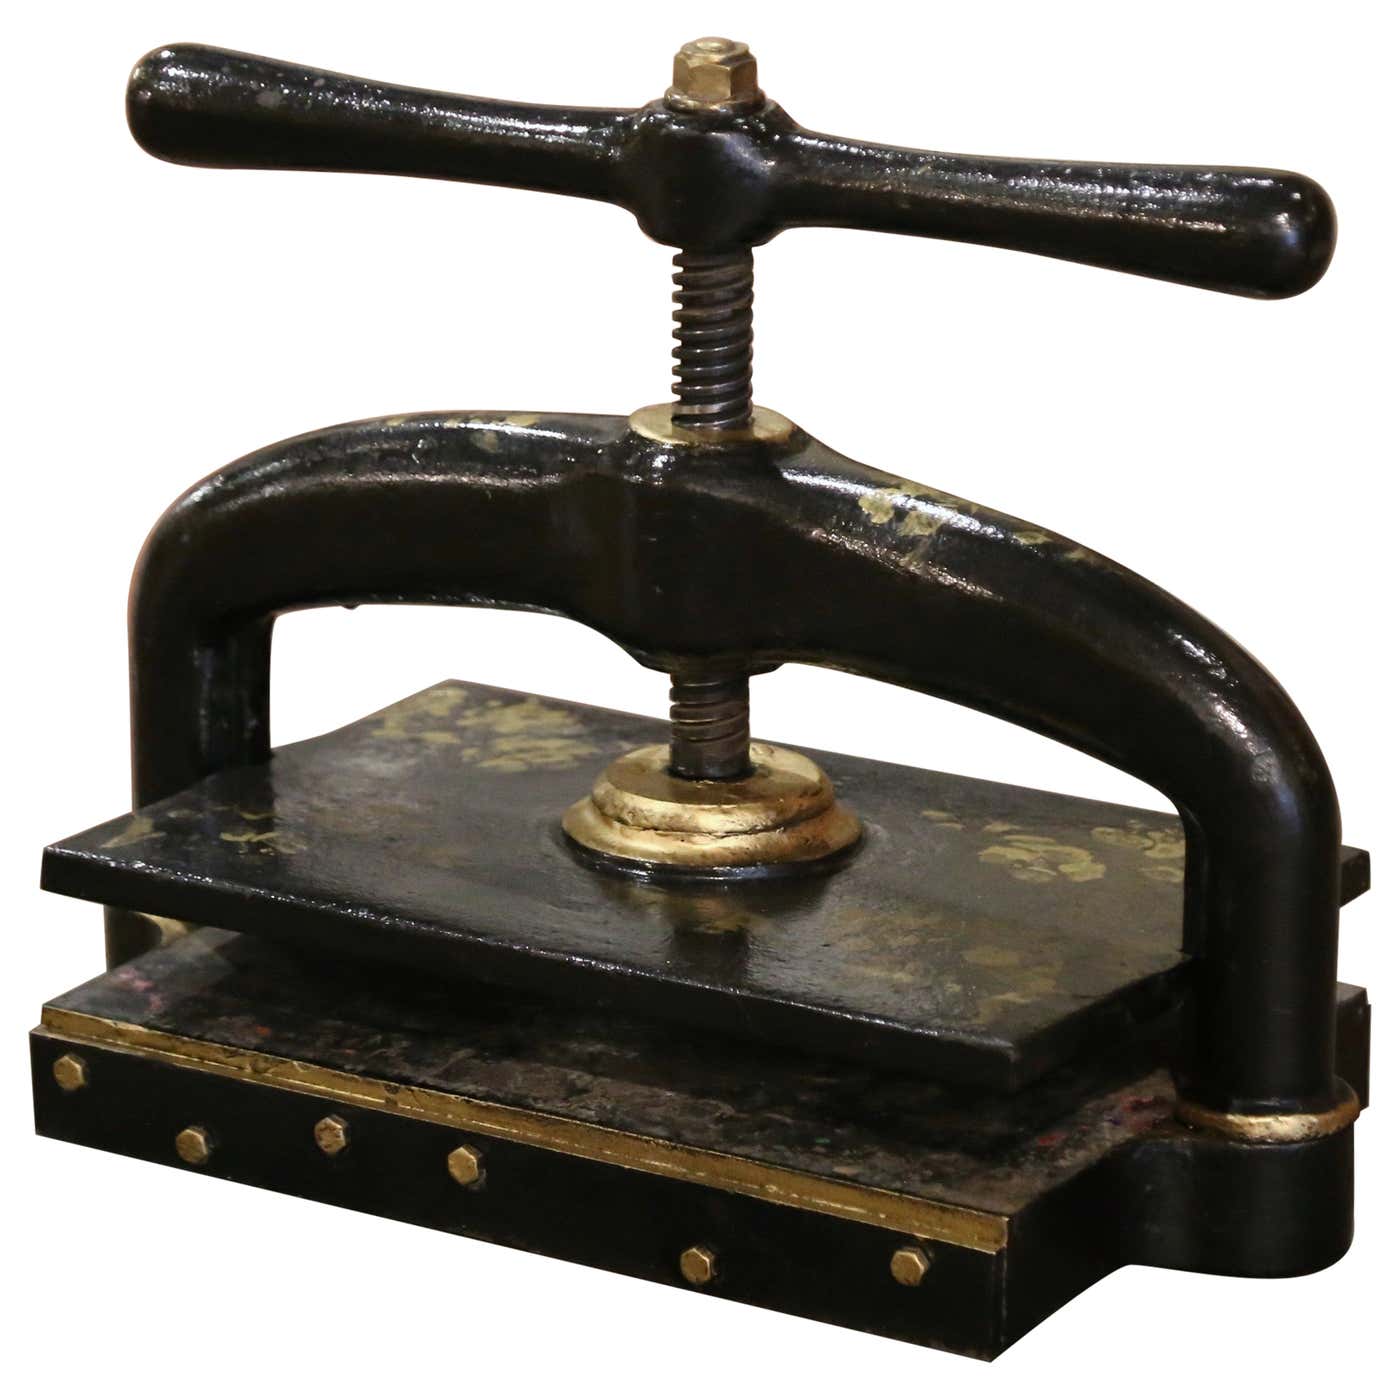 19th Century, French, Wrought Iron and Gilt Painted Book Binding Press